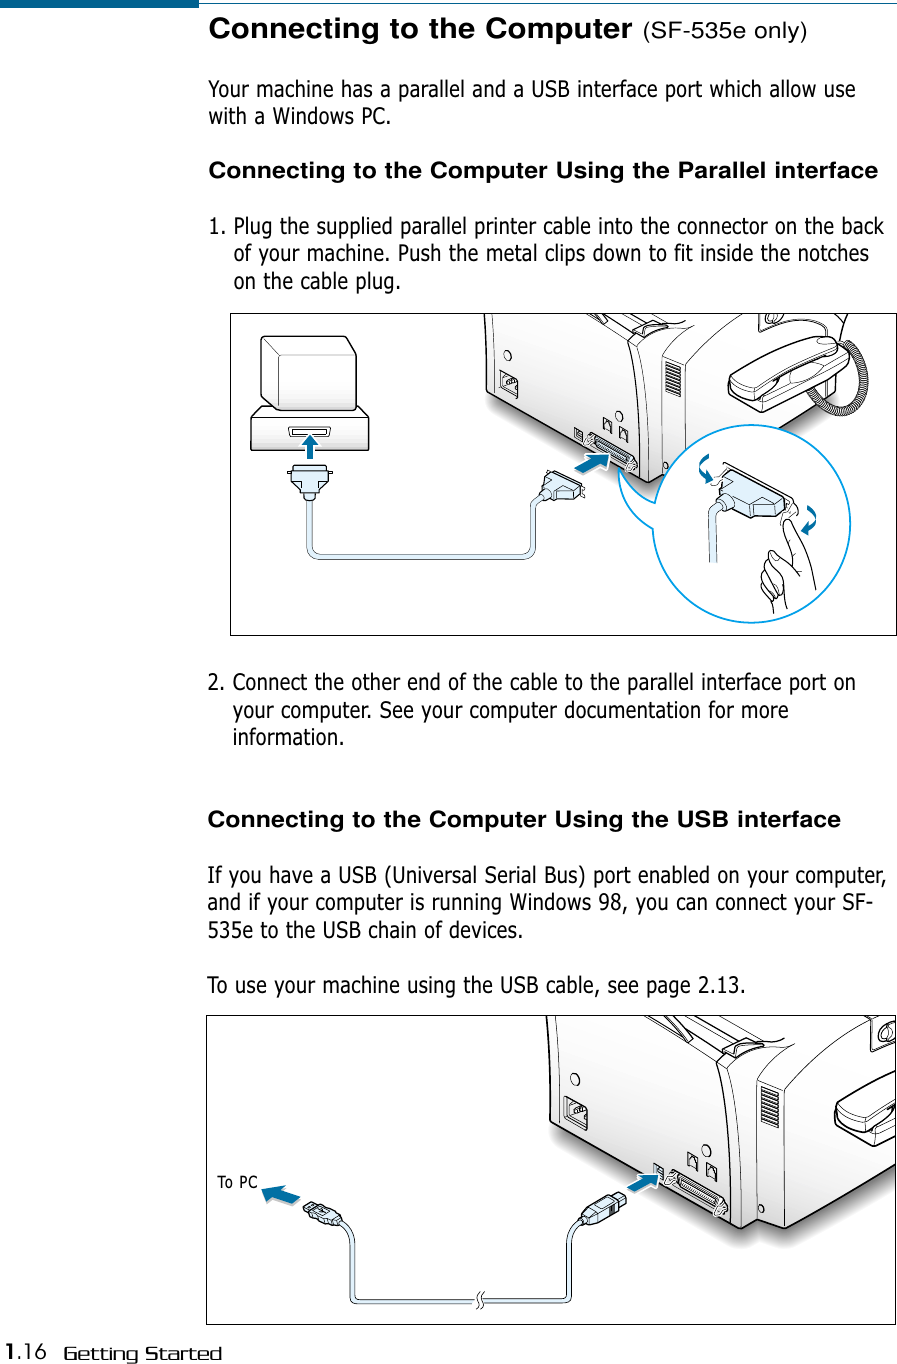 1.16 Getting StartedConnecting to the Computer (SF-535e only)Your machine has a parallel and a USB interface port which allow usewith a Windows PC. Connecting to the Computer Using the Parallel interface1. Plug the supplied parallel printer cable into the connector on the backof your machine. Push the metal clips down to fit inside the notcheson the cable plug.2. Connect the other end of the cable to the parallel interface port onyour computer. See your computer documentation for moreinformation.Connecting to the Computer Using the USB interfaceIf you have a USB (Universal Serial Bus) port enabled on your computer,and if your computer is running Windows 98, you can connect your SF-535e to the USB chain of devices.To use your machine using the USB cable, see page 2.13.000000000000000000000000000000000000000000000000000000000000000000000000000000000000000000000000000000000000000000000000000000000000000000To PC